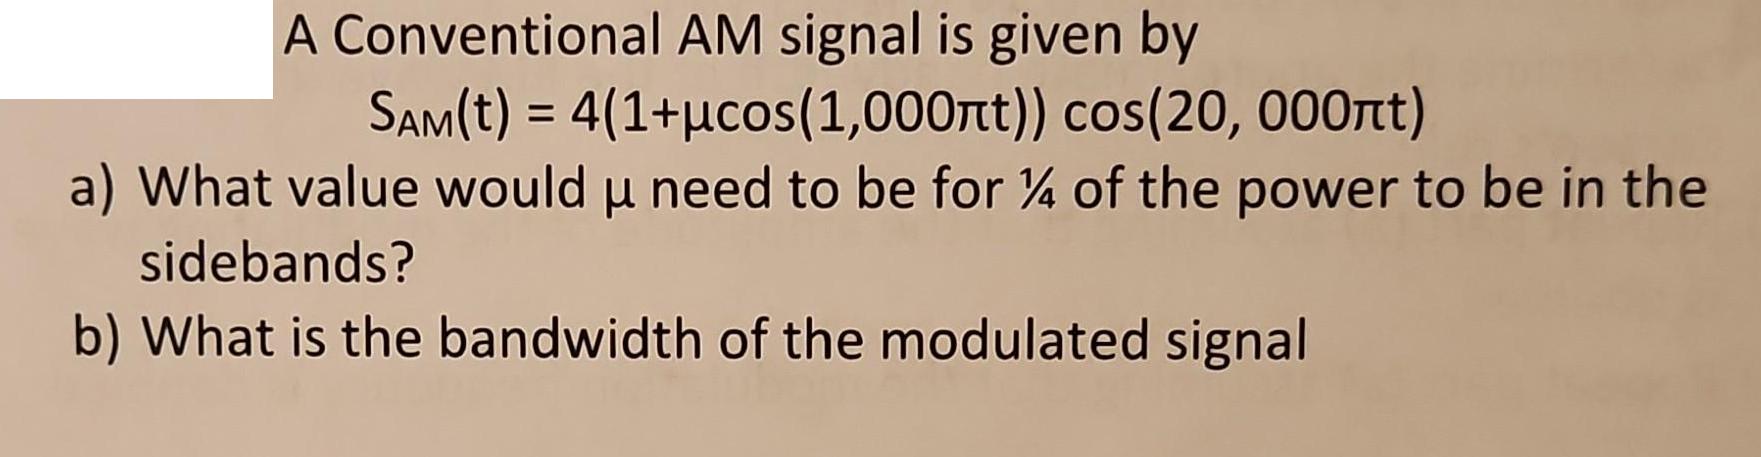 A Conventional AM signal is given by SAM(t) = 4(1+cos (1,000t)) cos(20, 000t) a) What value would  need to be